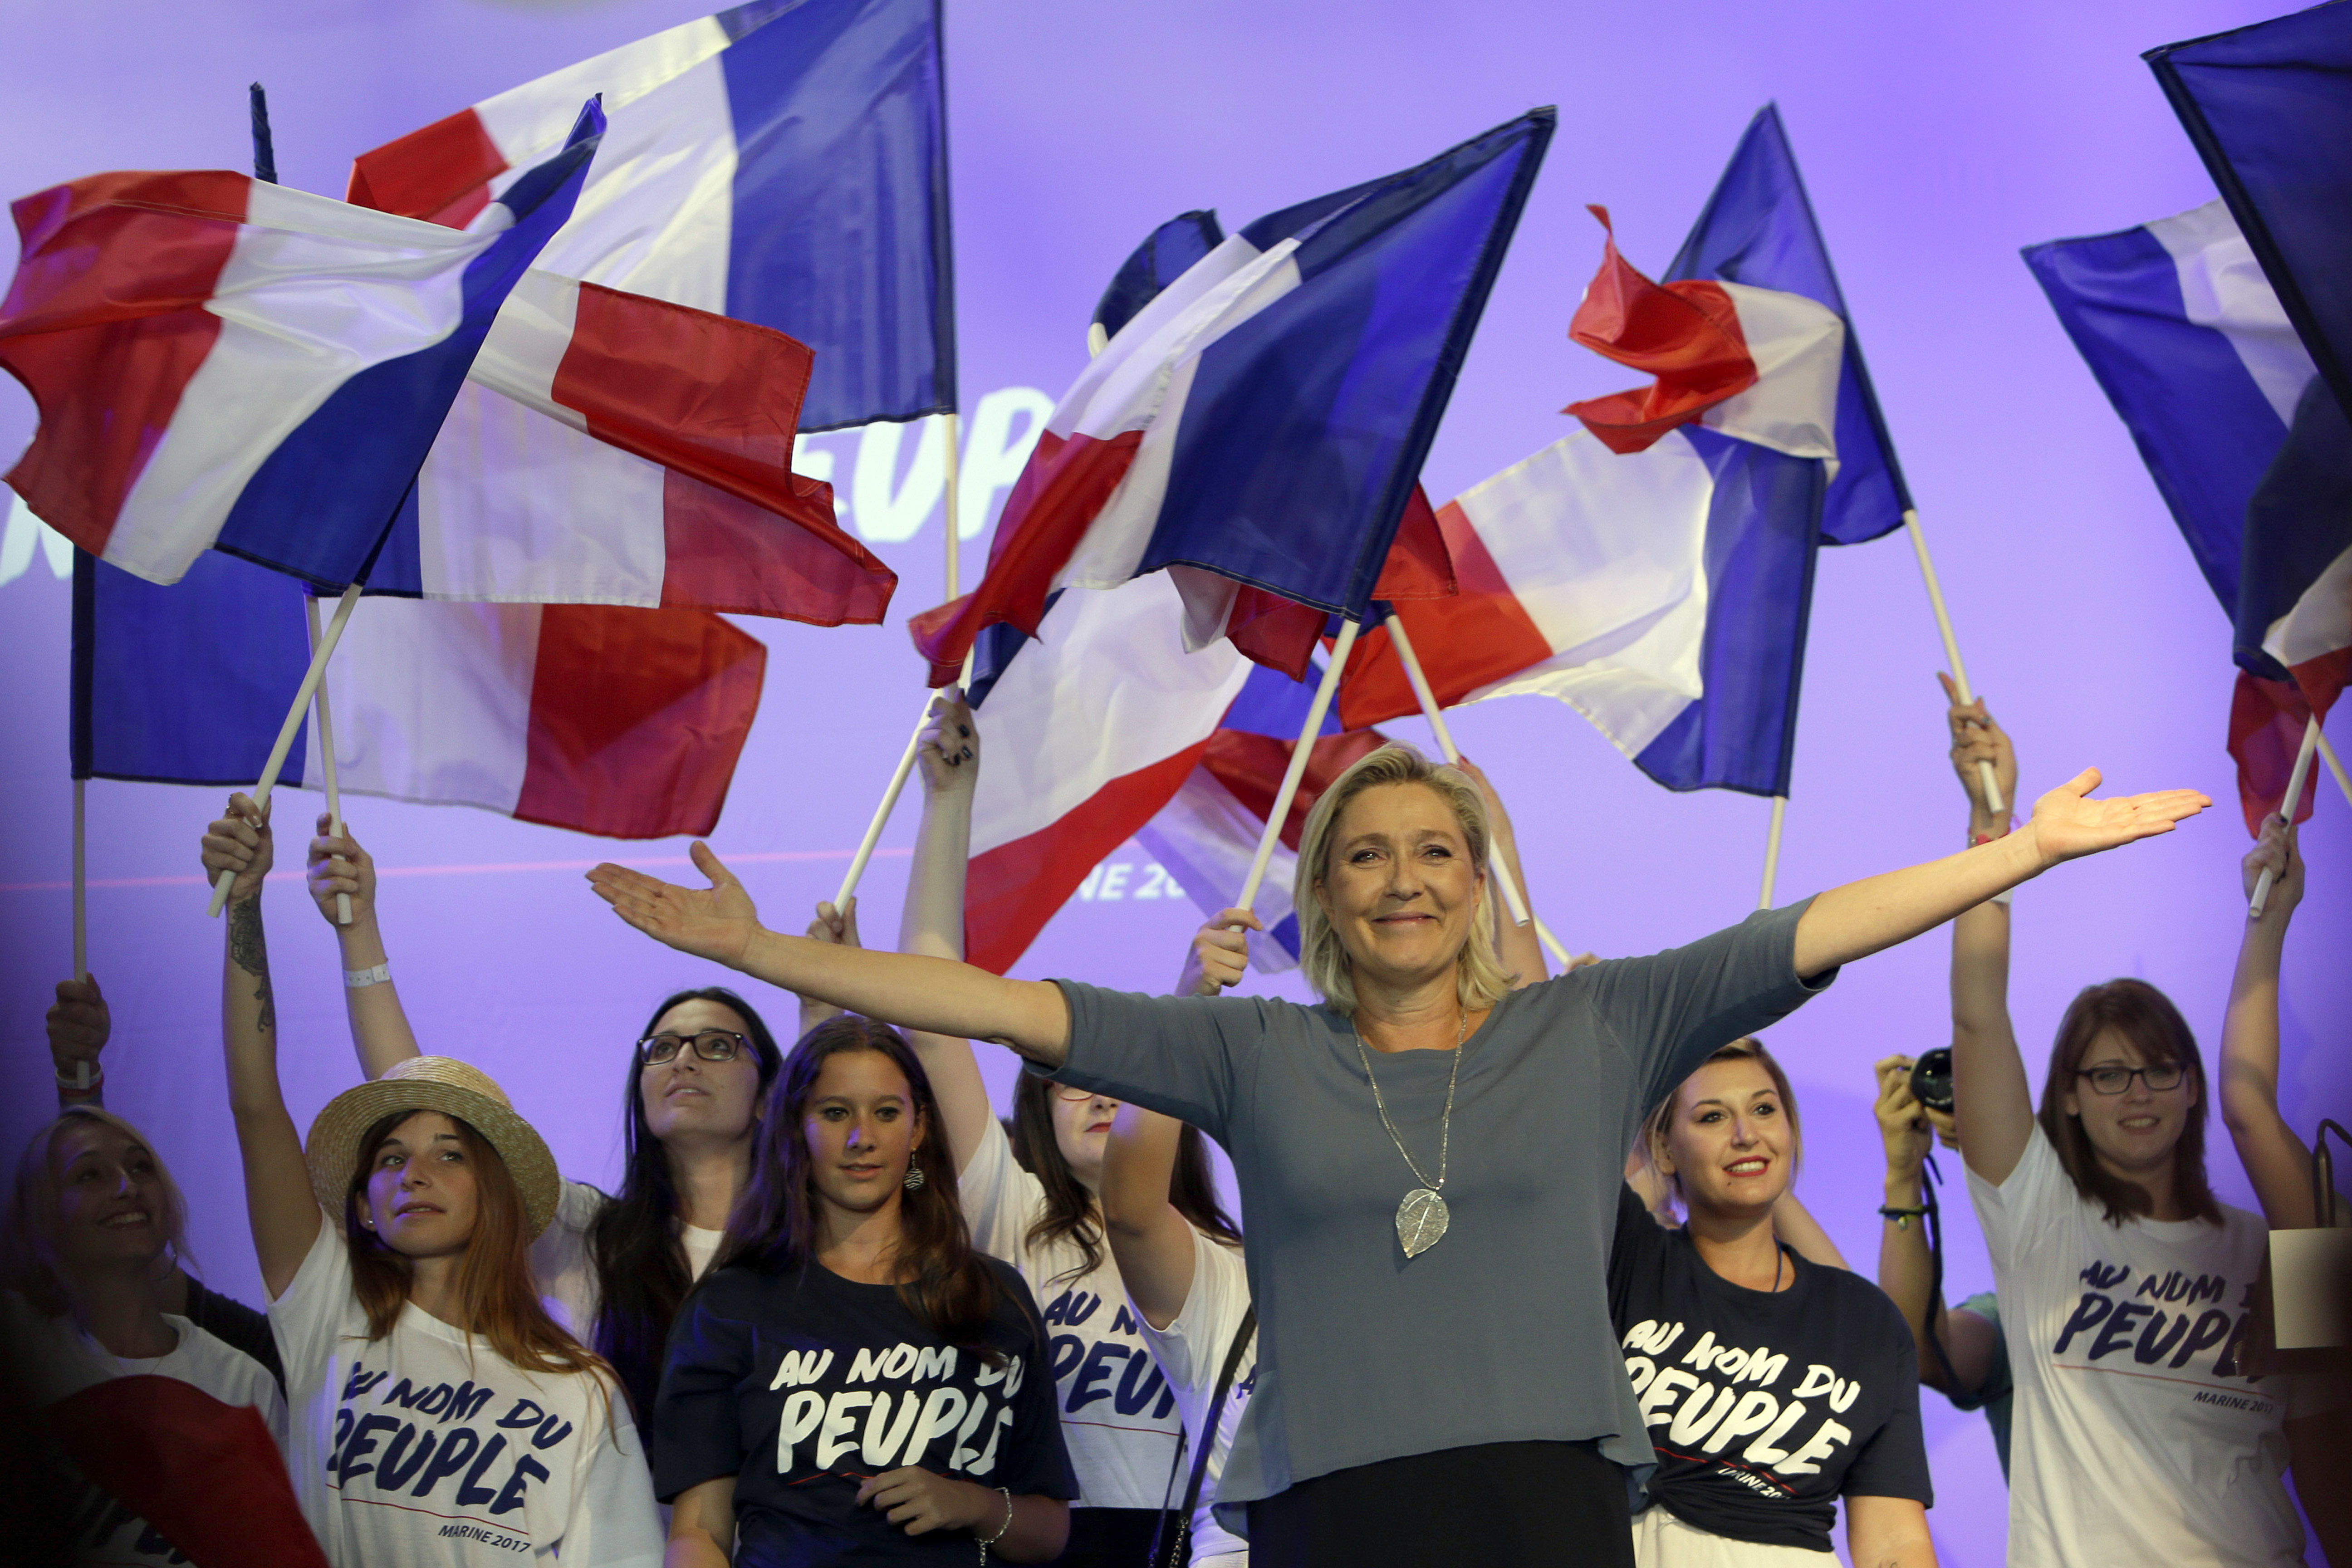 France's far-right National Front president Marine Le Pen waves to supporters during the summer meeting, 'Les Estivales de Marine Le Pen', in Frejus, southern France, Sunday, Sep. 13, 2016. (AP Photo/Claude Paris)